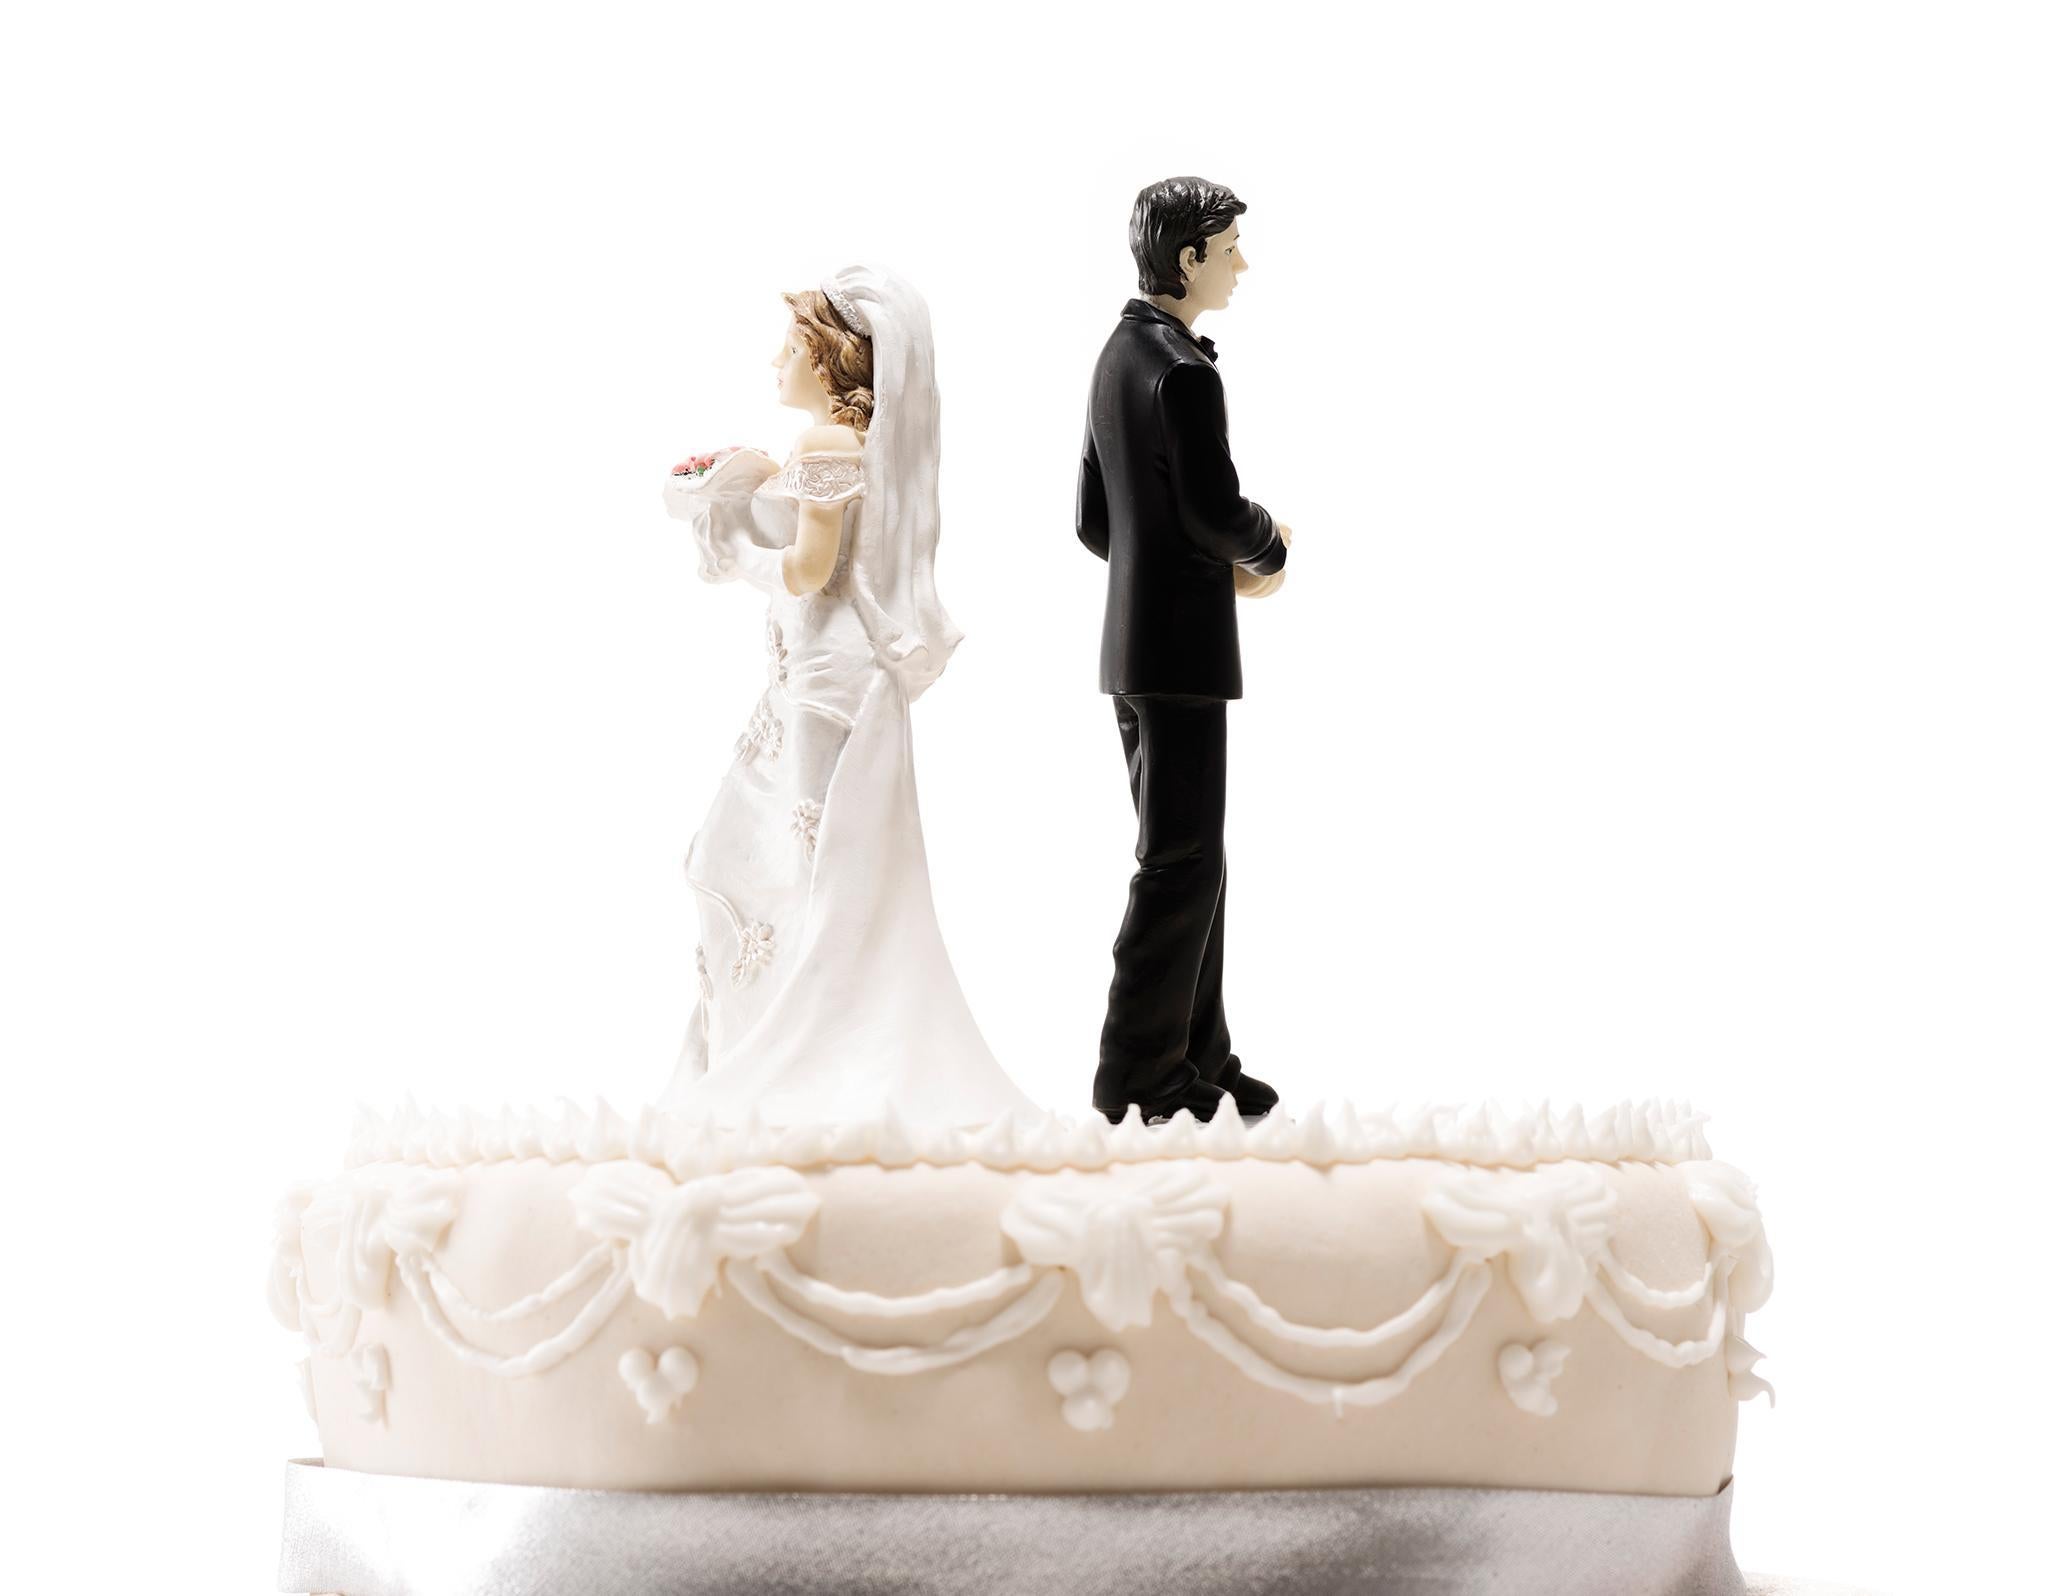 As they age, women become much less willing to instigate divorce proceedings